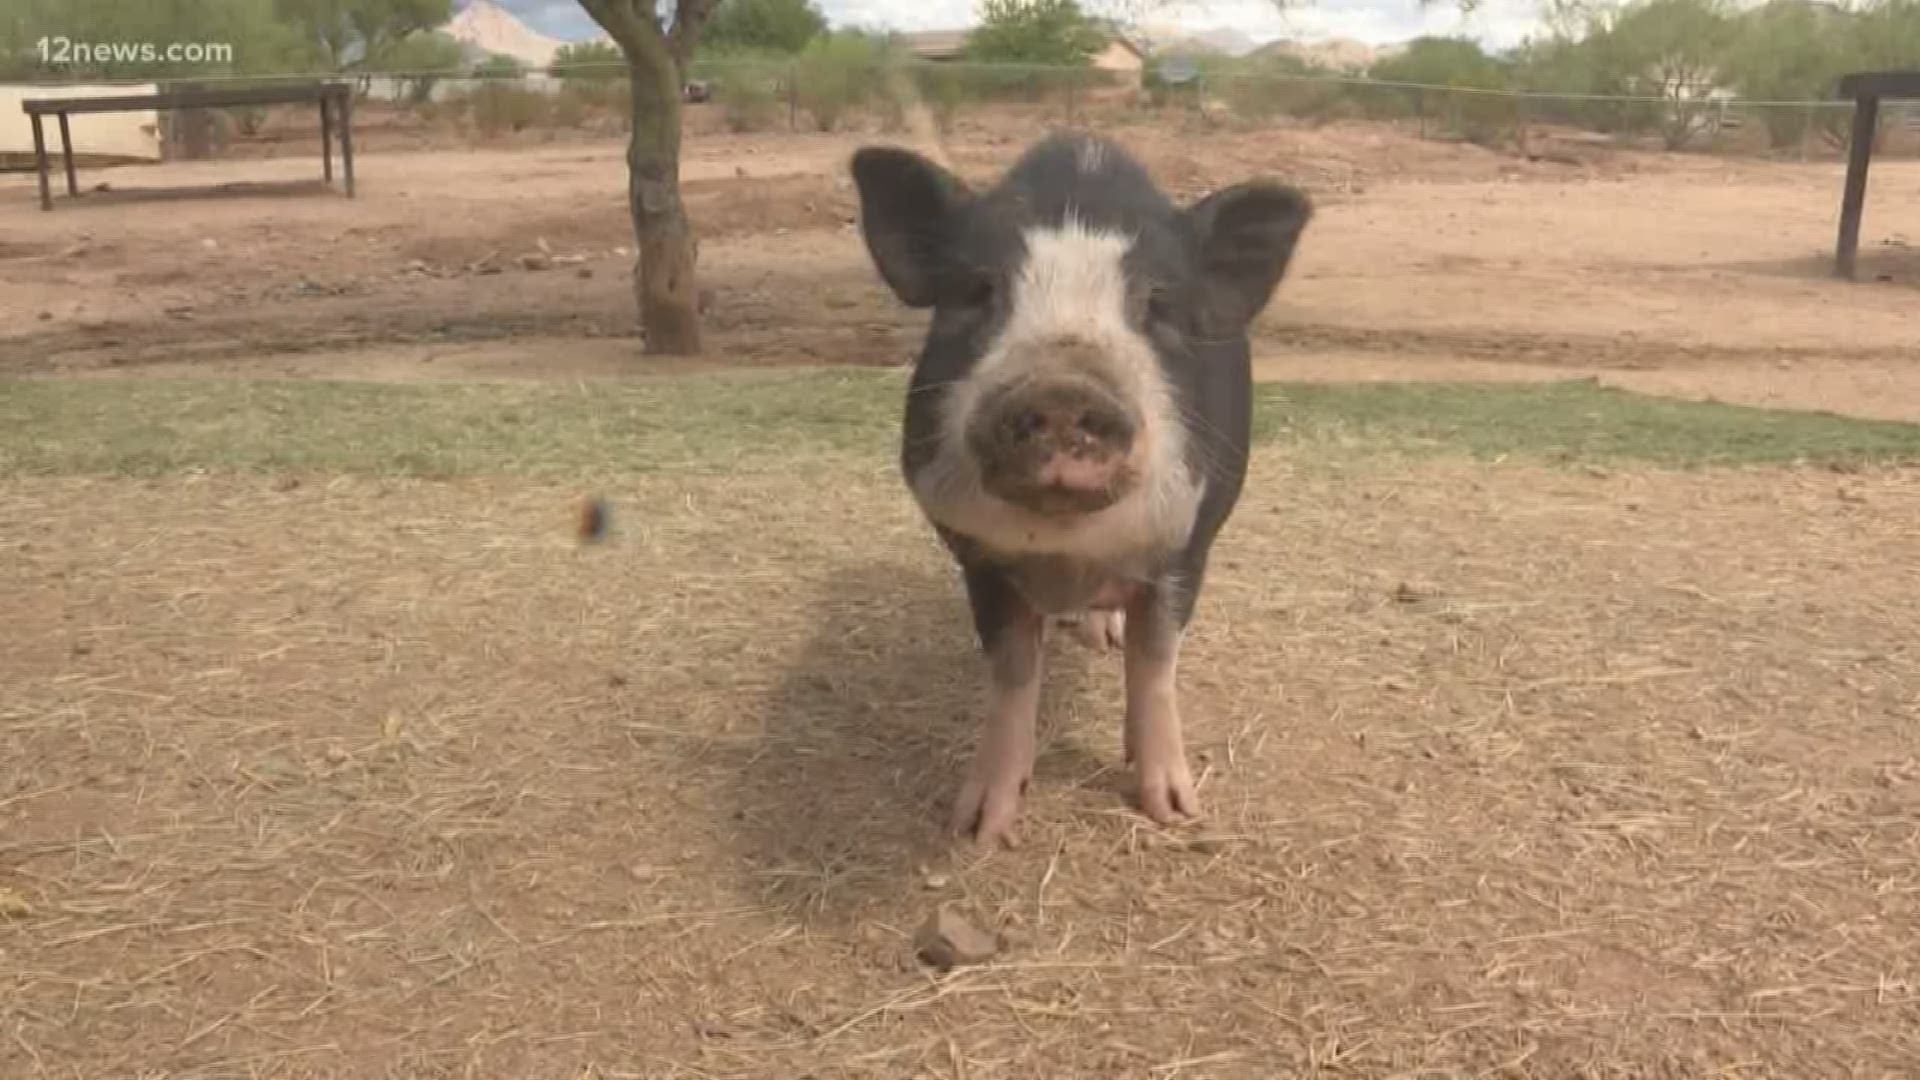 Better Piggies Rescue has doubled their average of potbellied pigs surrendered or rescued.